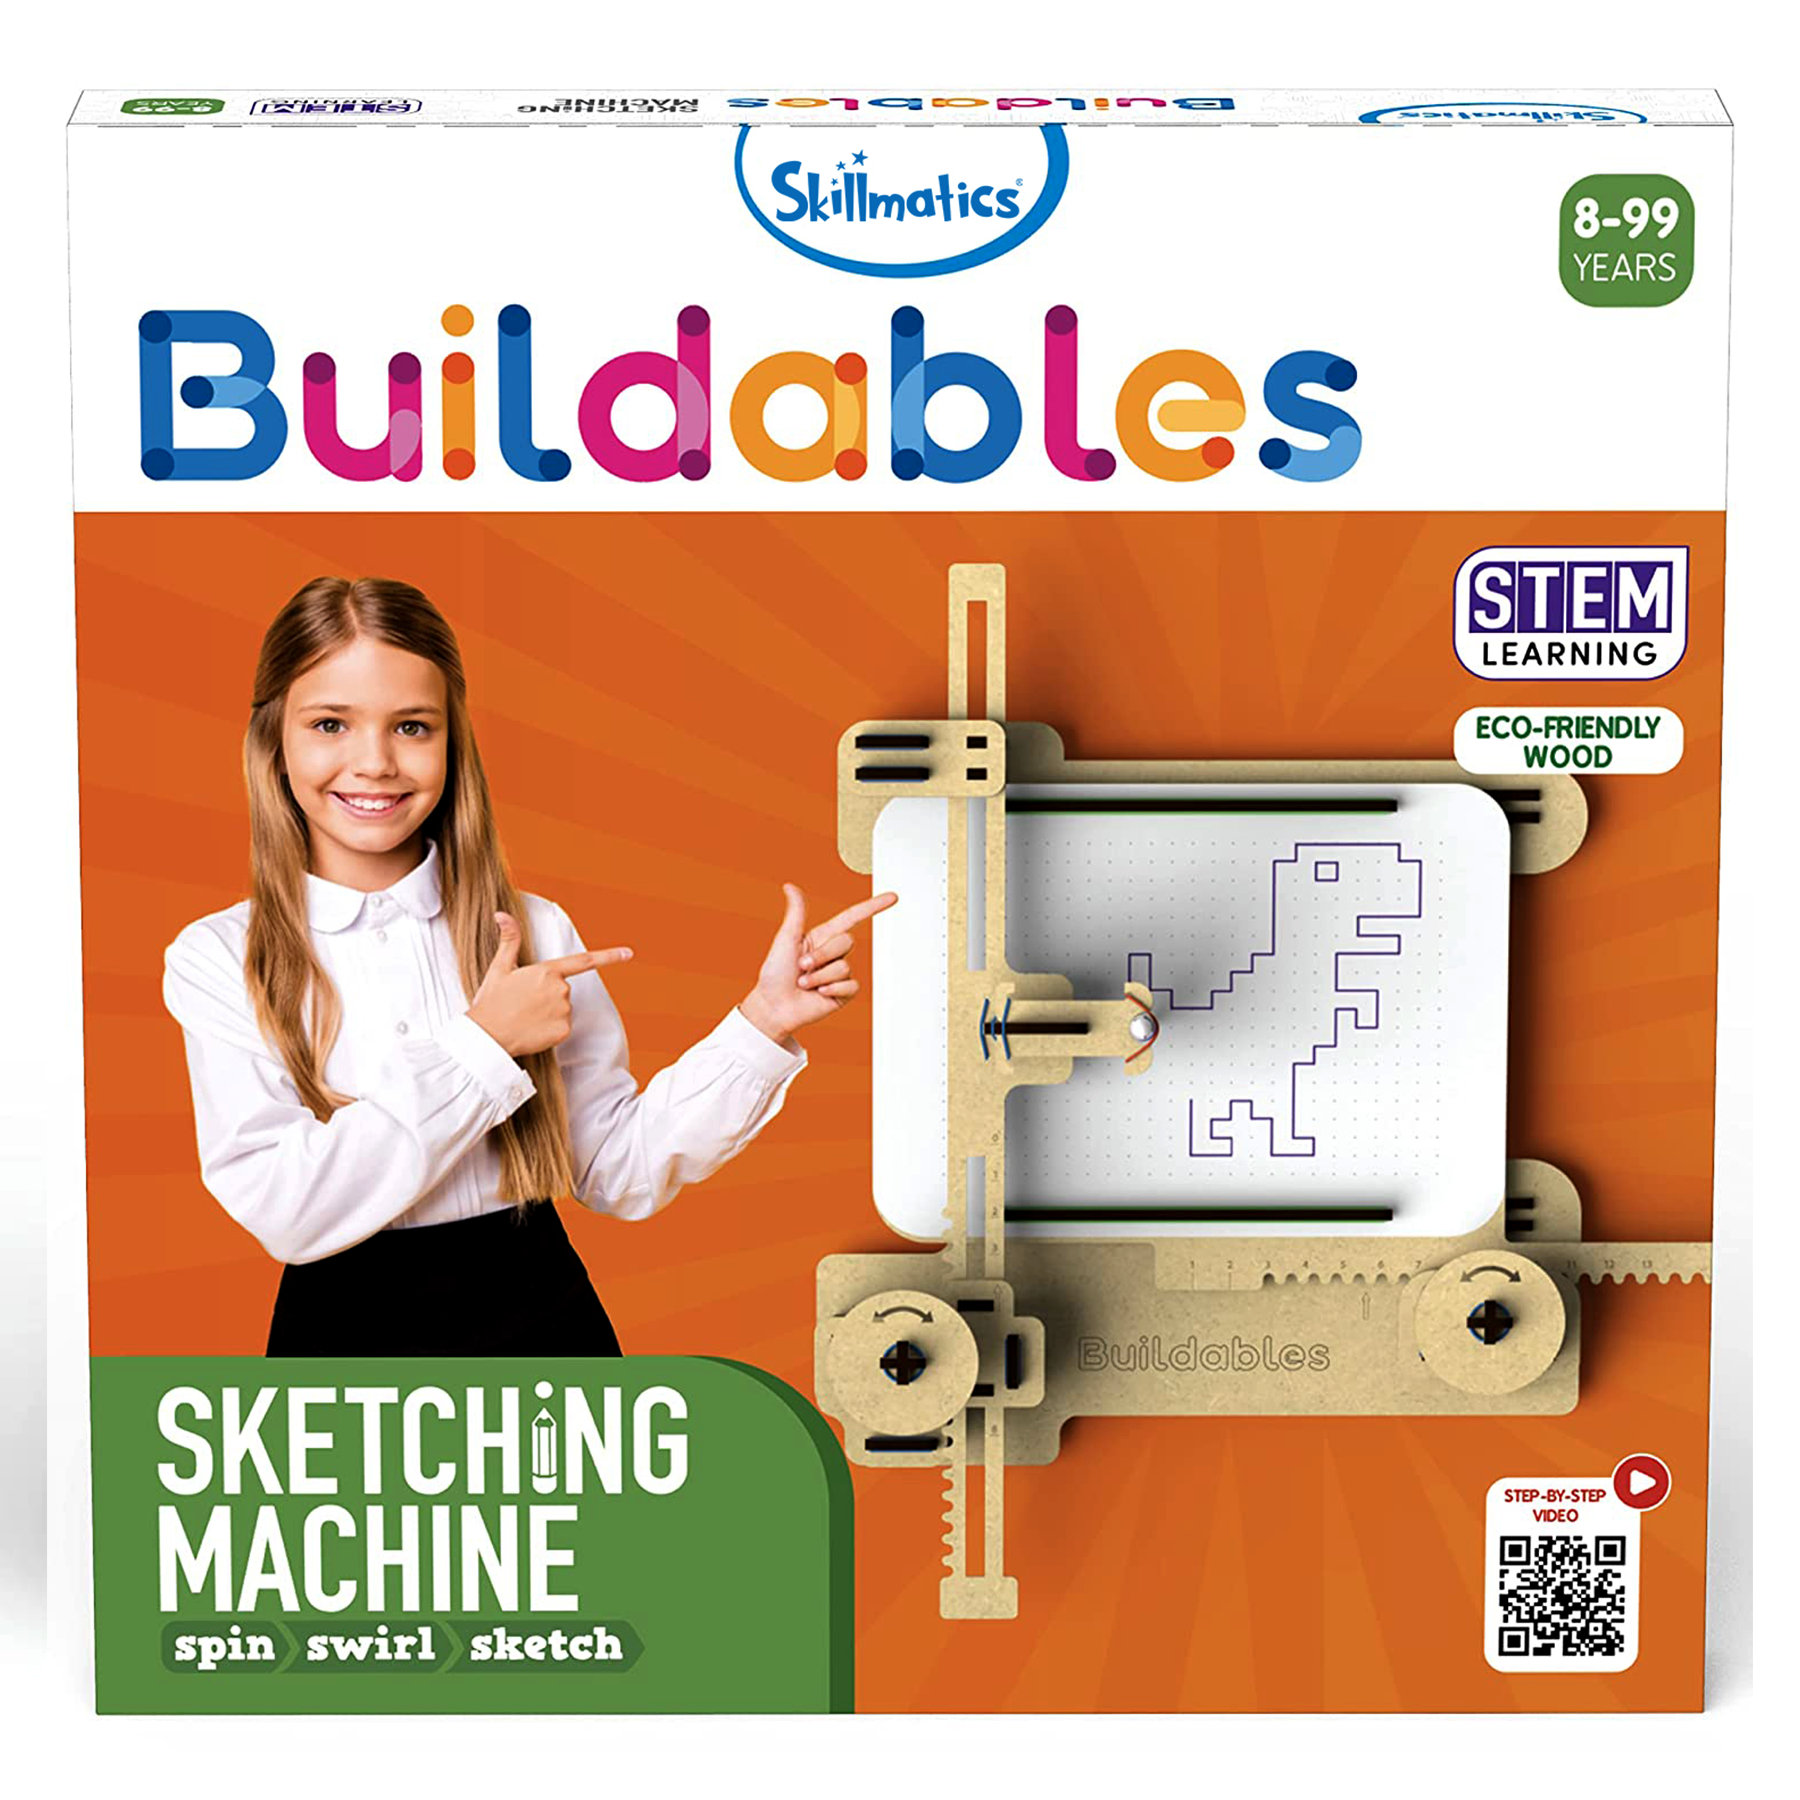 Buildables | Sketching Machine